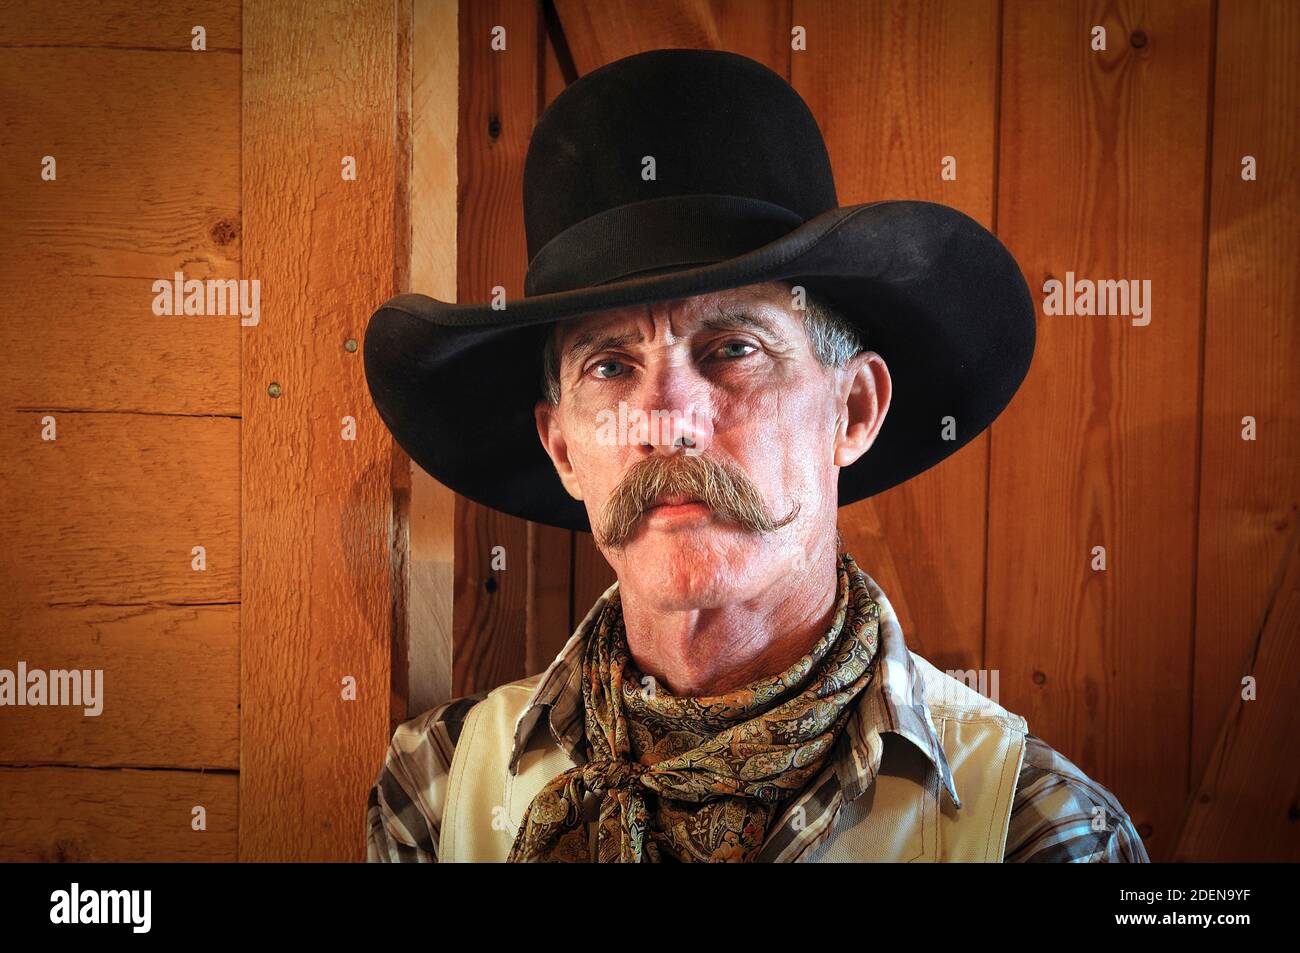 USA, Rocky Mountains, Wyoming, Sublette County, Pinedale, Flying A Ranch, Cowboy Portrait MR Stock Photo